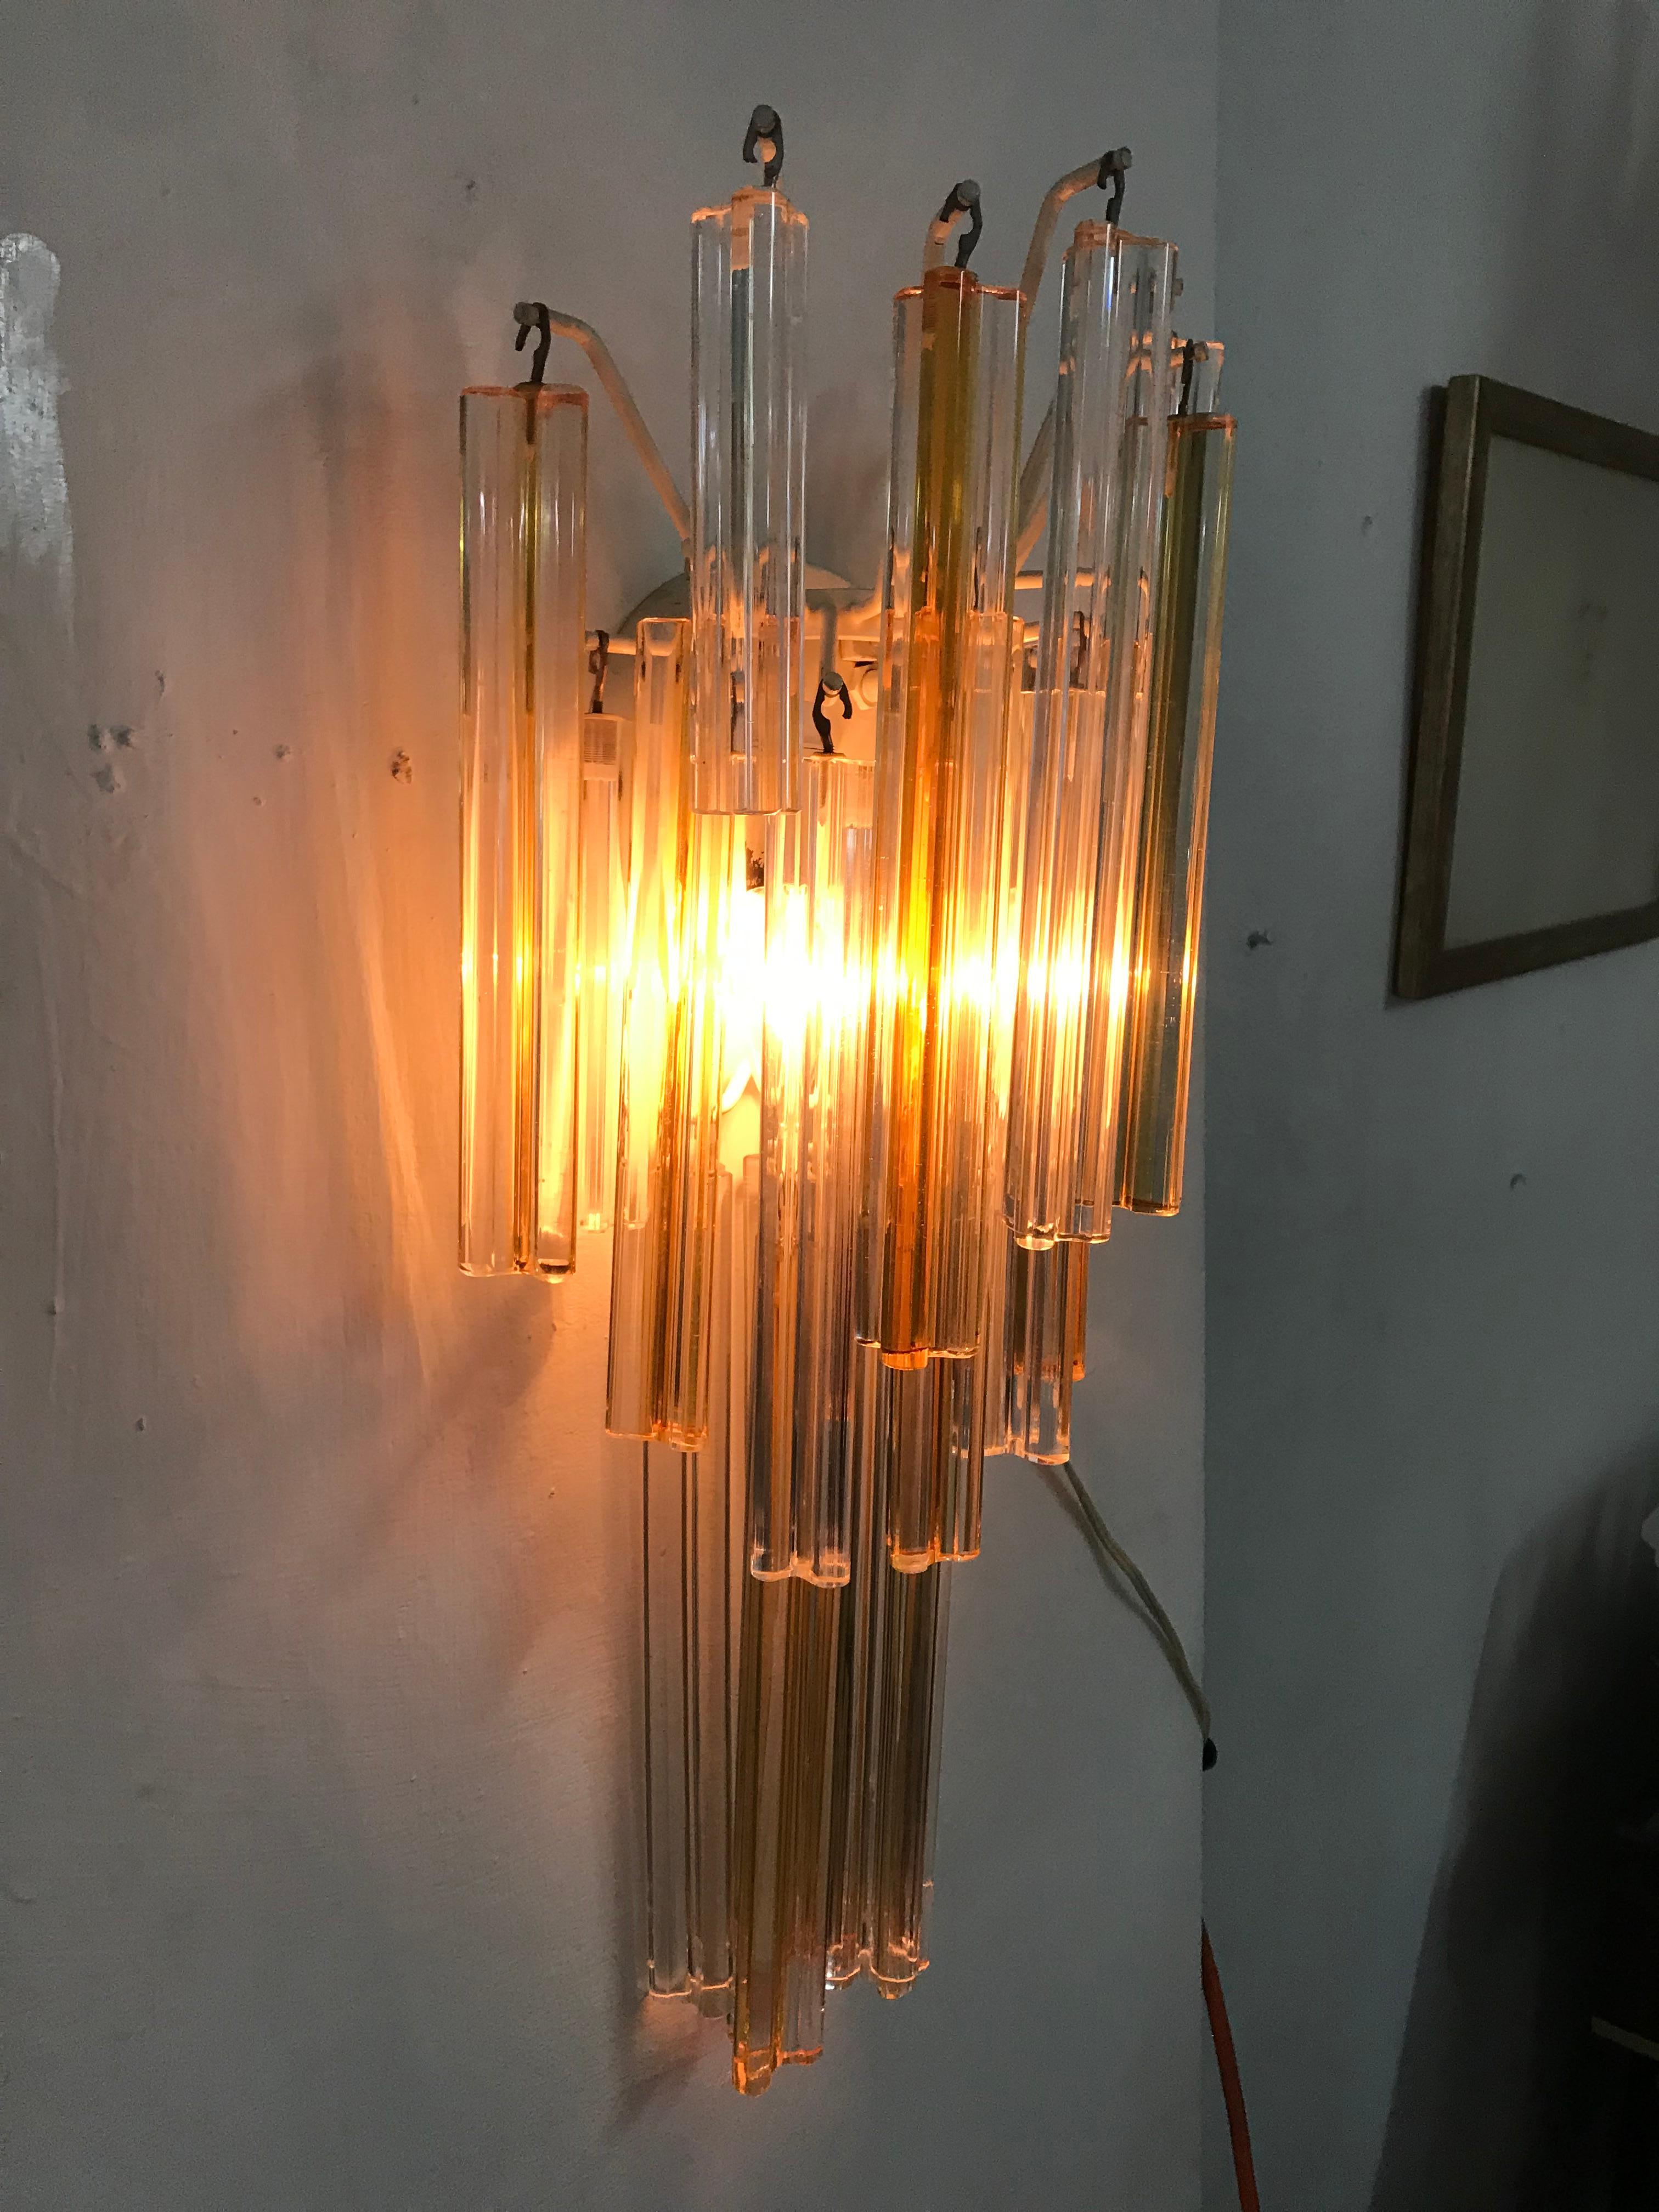 Pair of Mid-Century Modern sconces 'Asta Triedo' model designed by Paolo Venini for Venini and manufactured circa 1960, in three different lenghts of spears in amber and clear colored Murano glass, which can be used to vary the dimensions of each